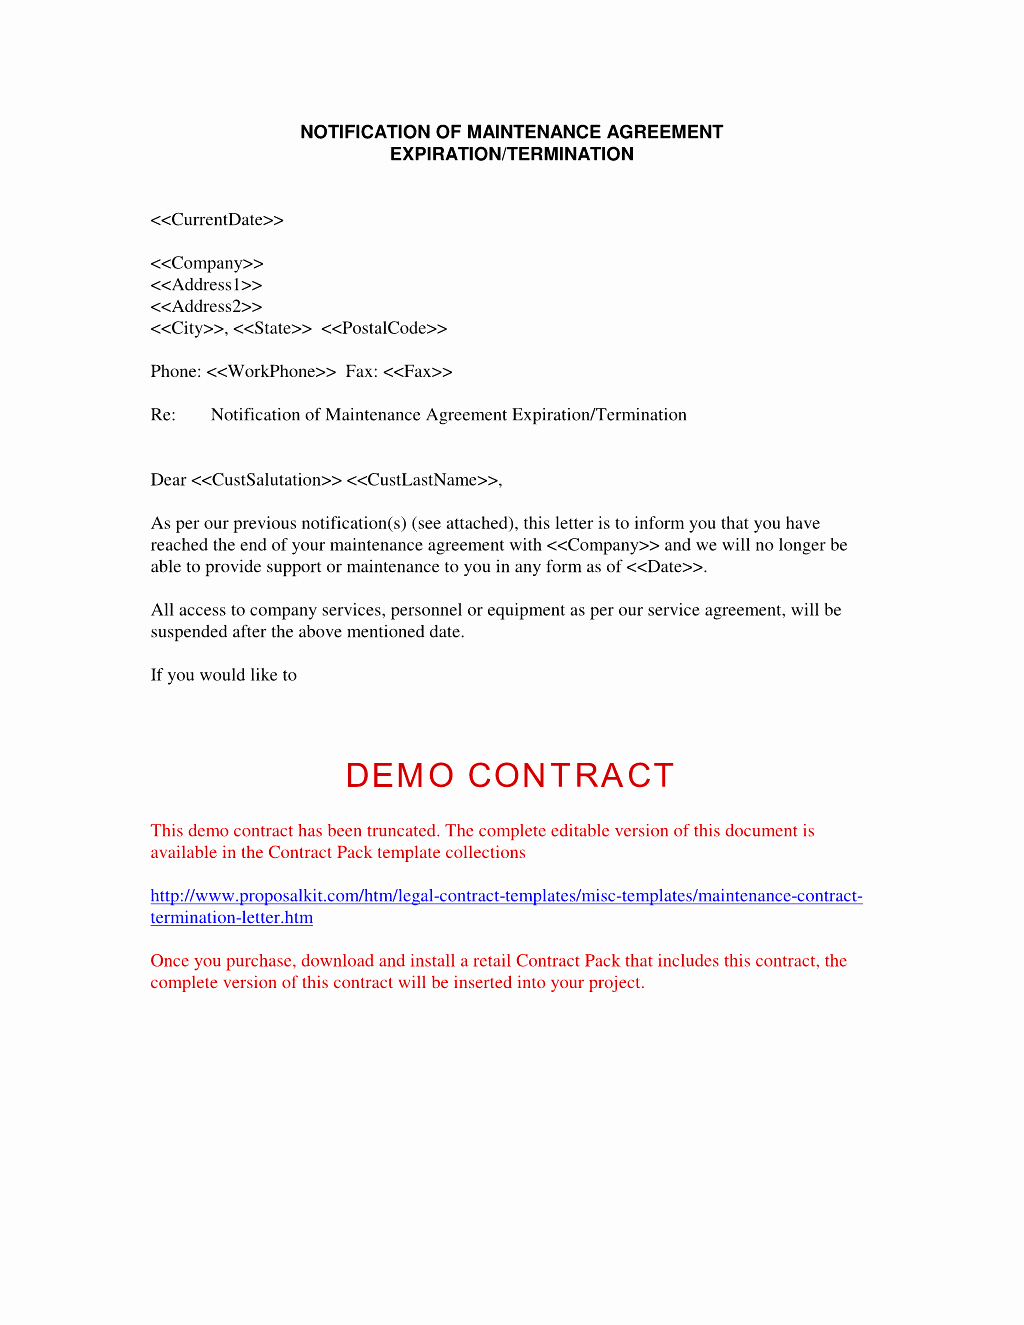 client termination letter template Collection-Termination Contract Letter Example Elegant Termination attorney Client Relationship Letter Nice Contract 17-a